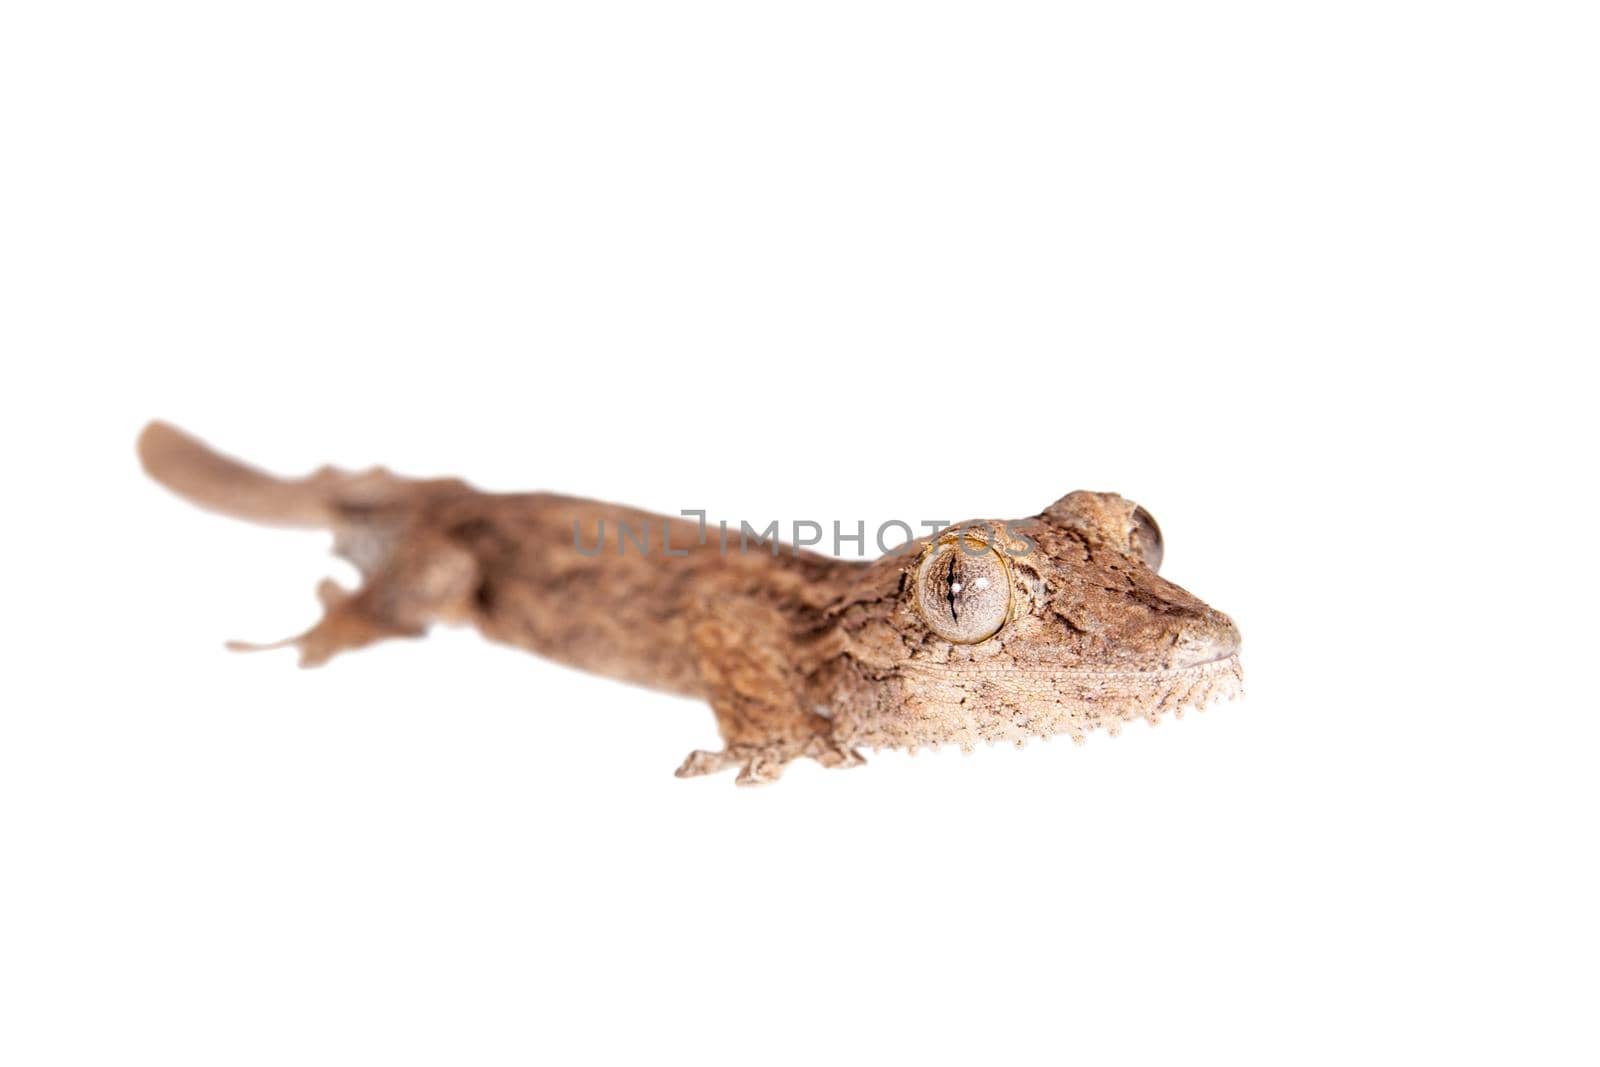 Leaf-toed gecko, unknow uroplatus, on white by RosaJay